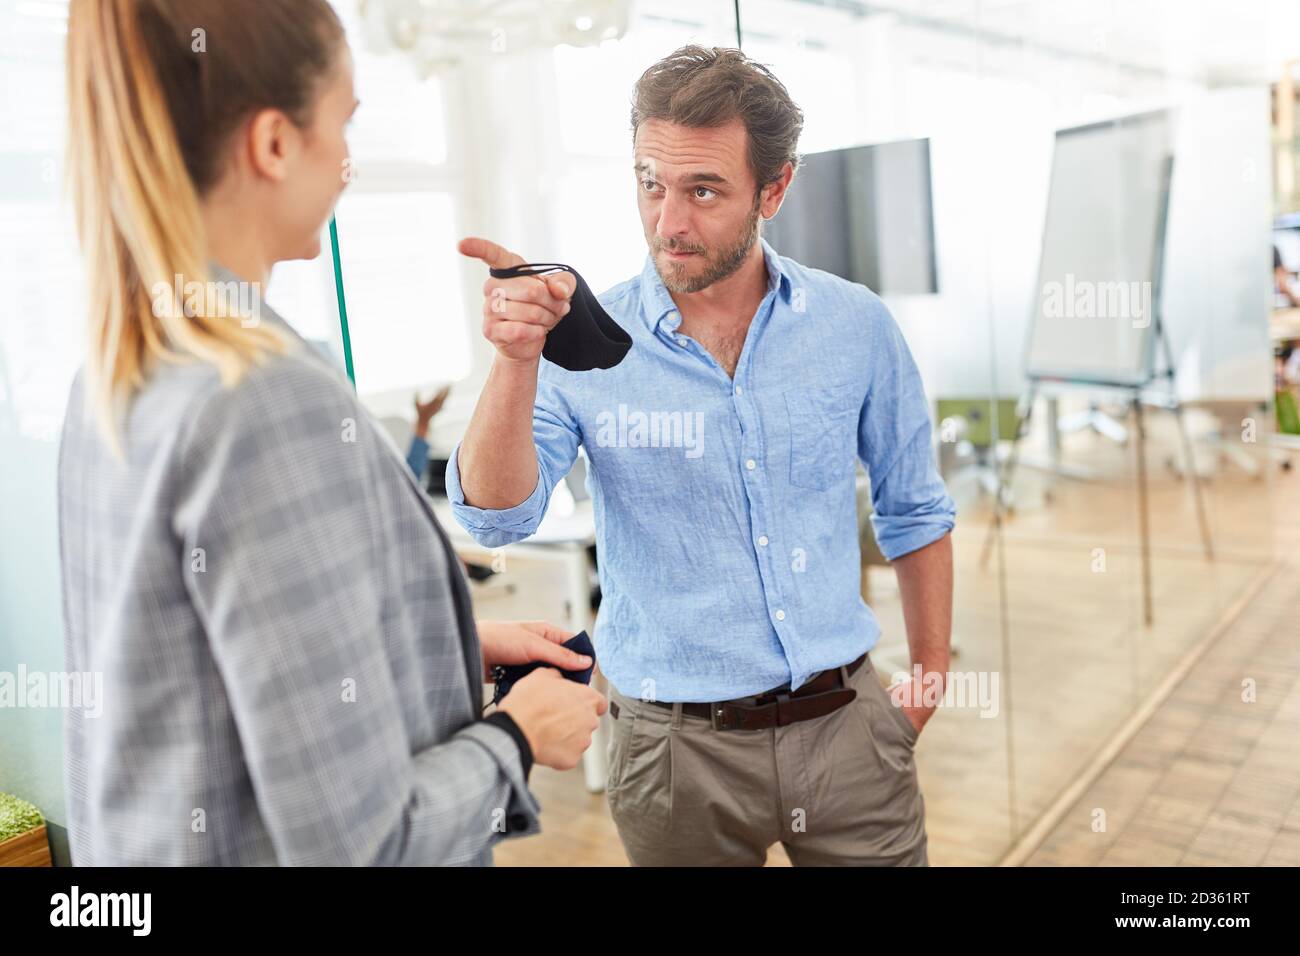 Businessman admonishes colleague with an outstretched index finger as criticism Stock Photo